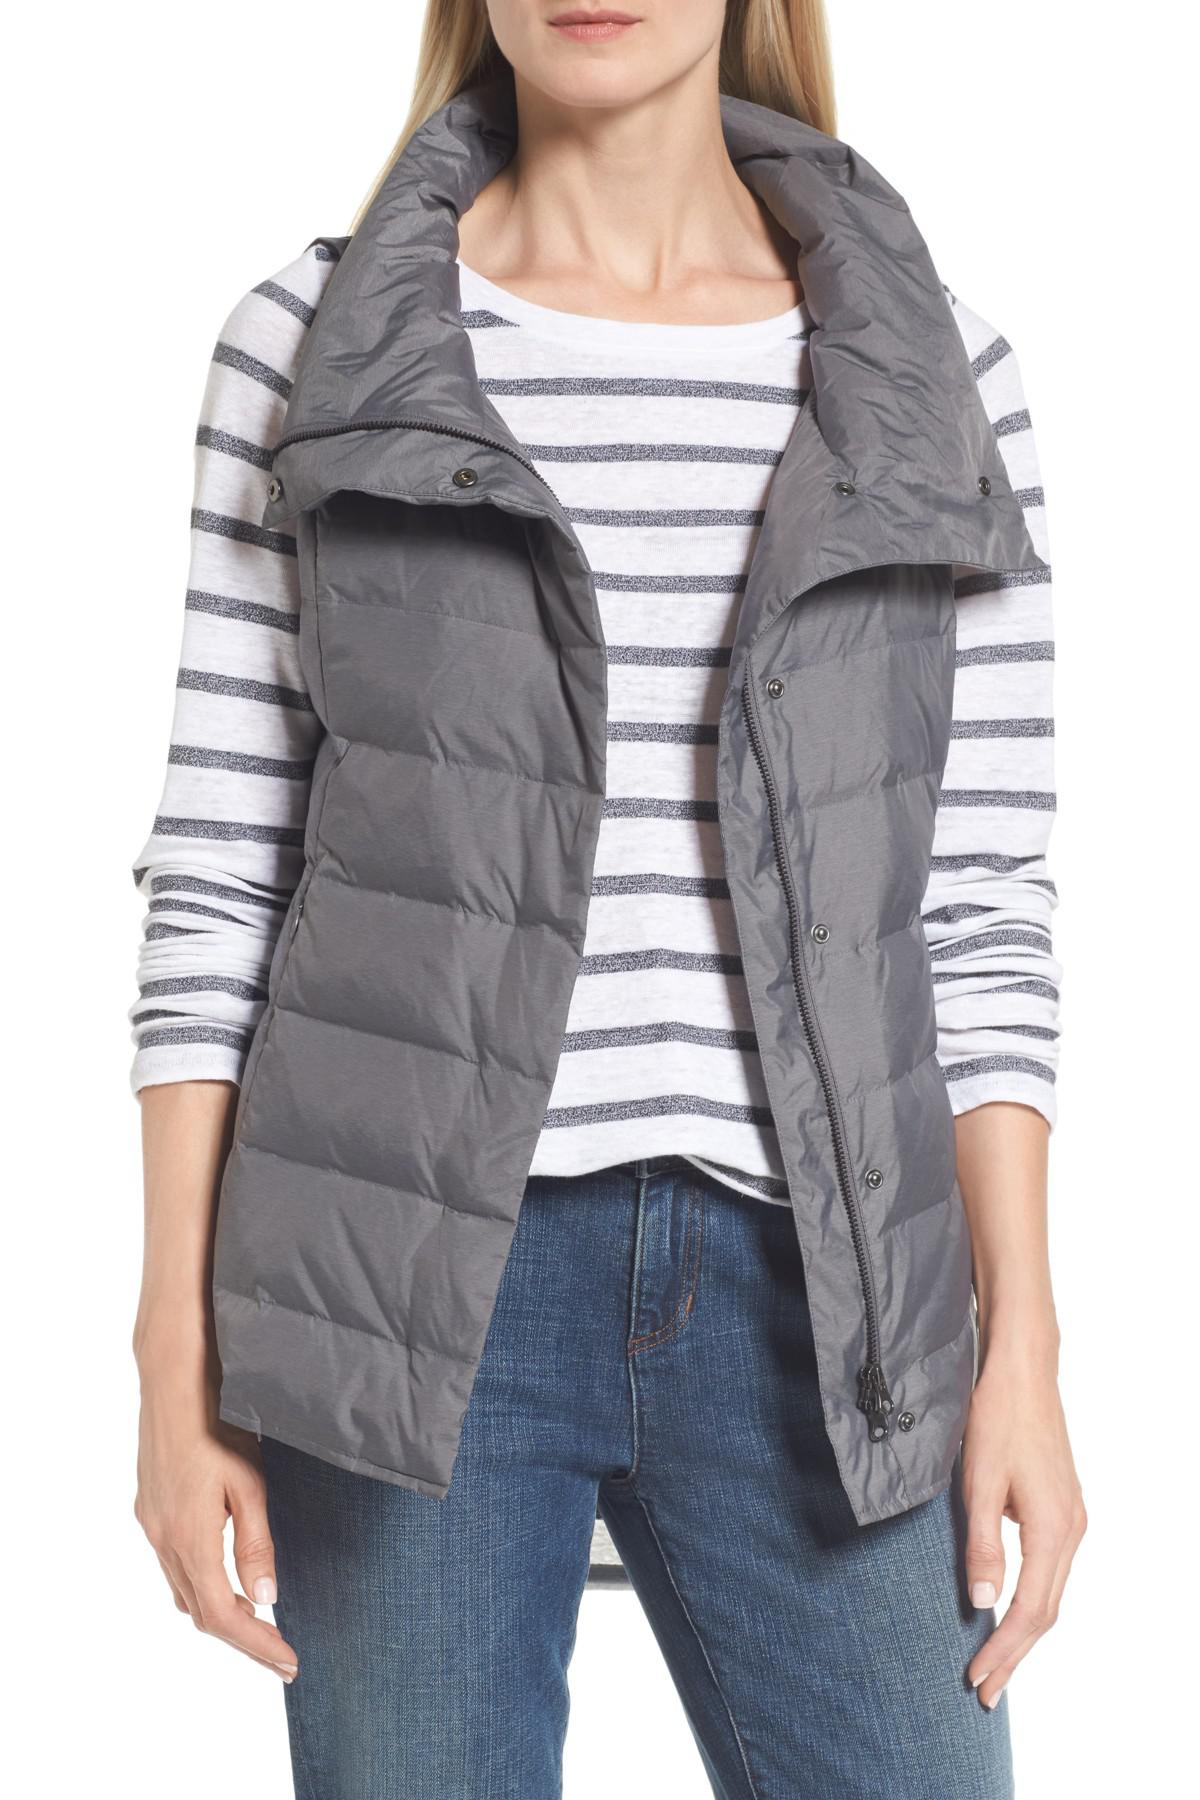 Lyst Eileen Fisher Stand Collar Vest in Gray